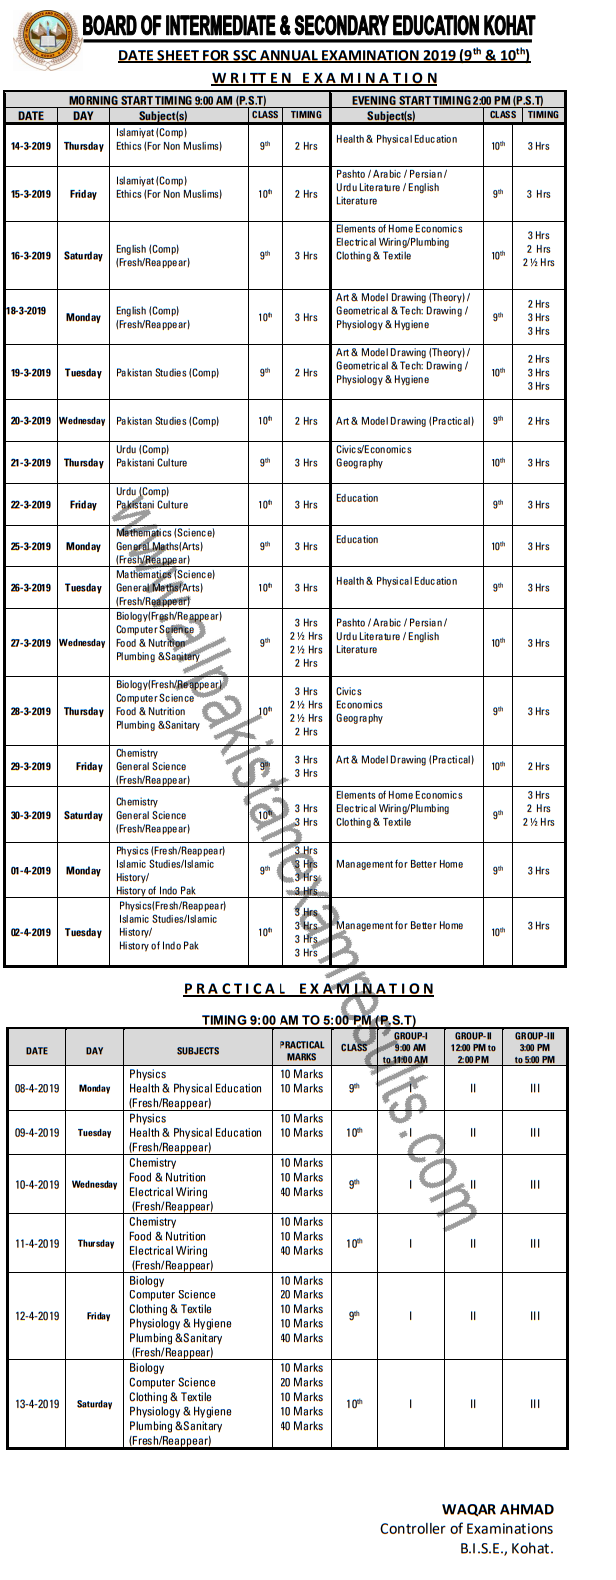 BISE Kohat 10th Class Date Sheet 2019